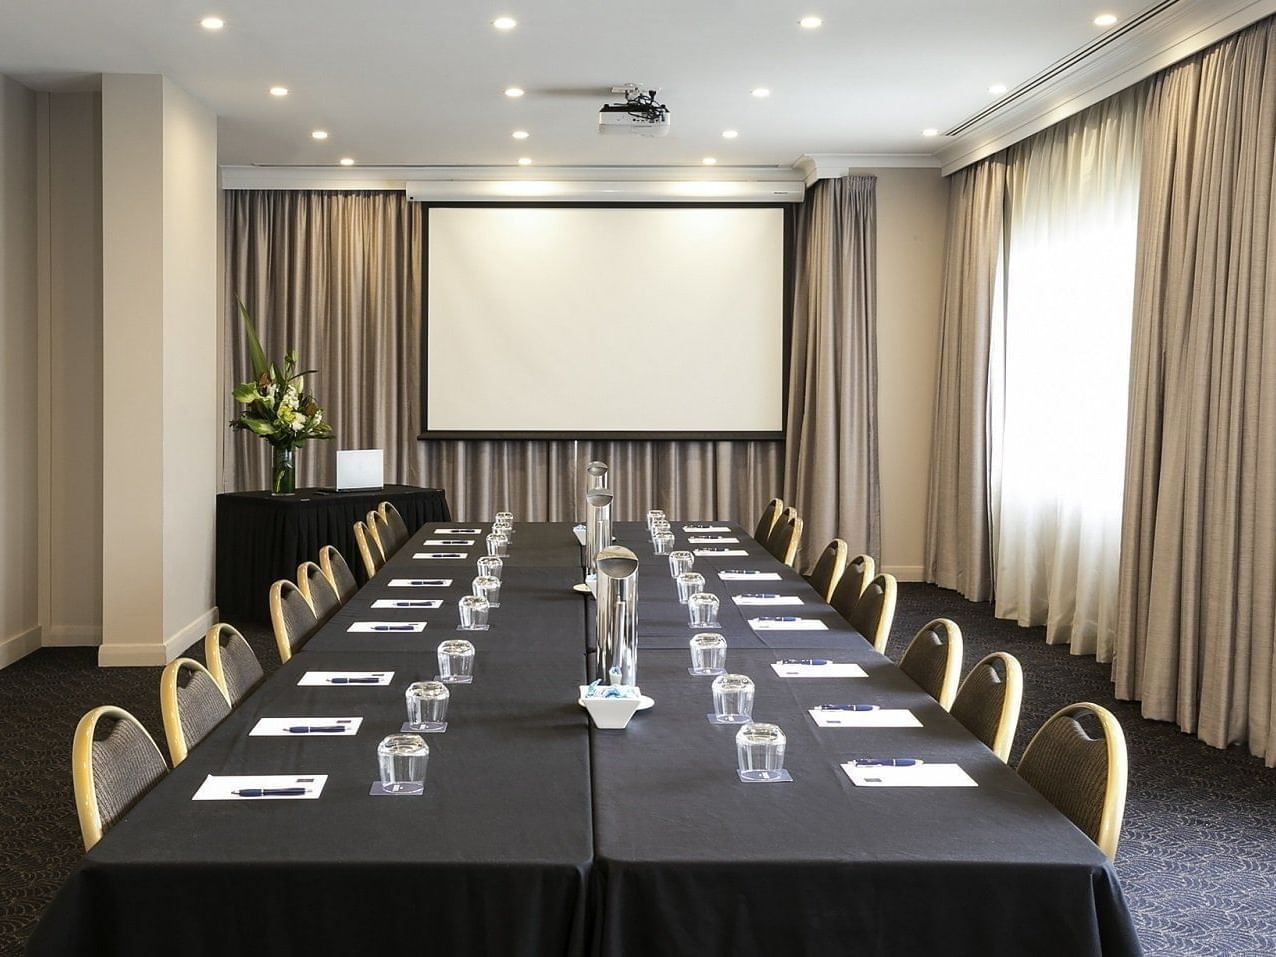 Properly arranged meeting room at the Sebel Residence Chatswood